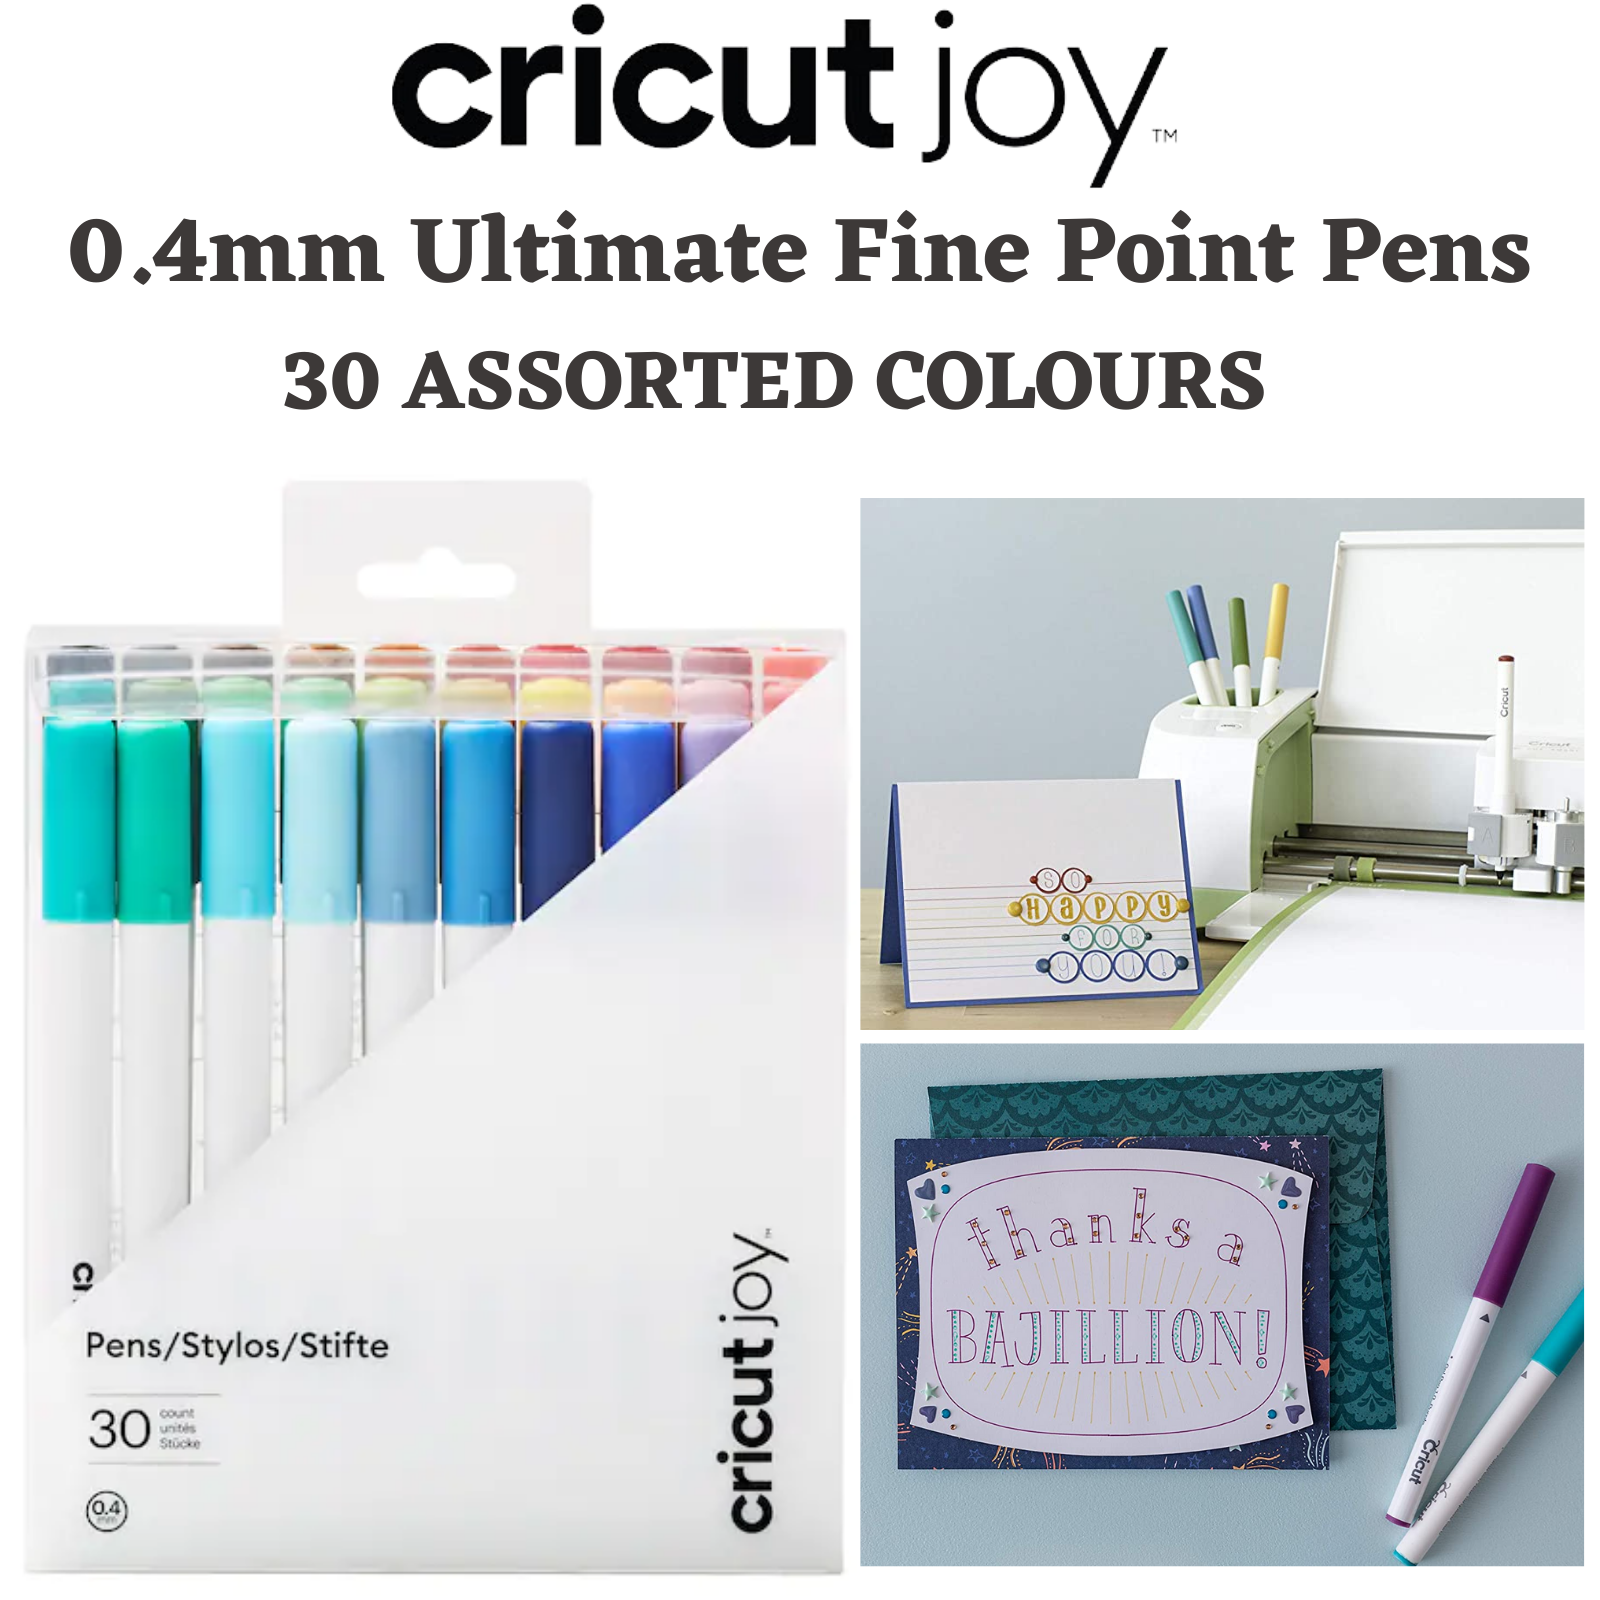 BujoFuyo on X: Cricut Ultimate Fine Point Pen Set Swatch Test I think  cactus pink might be my favorite - what's yours? #bujofuyo #bujo  #bujoinspiration #bujocommunity #planner #plannerinspiration  #plannercommunity #pens #cricut #swatchtesttuesday